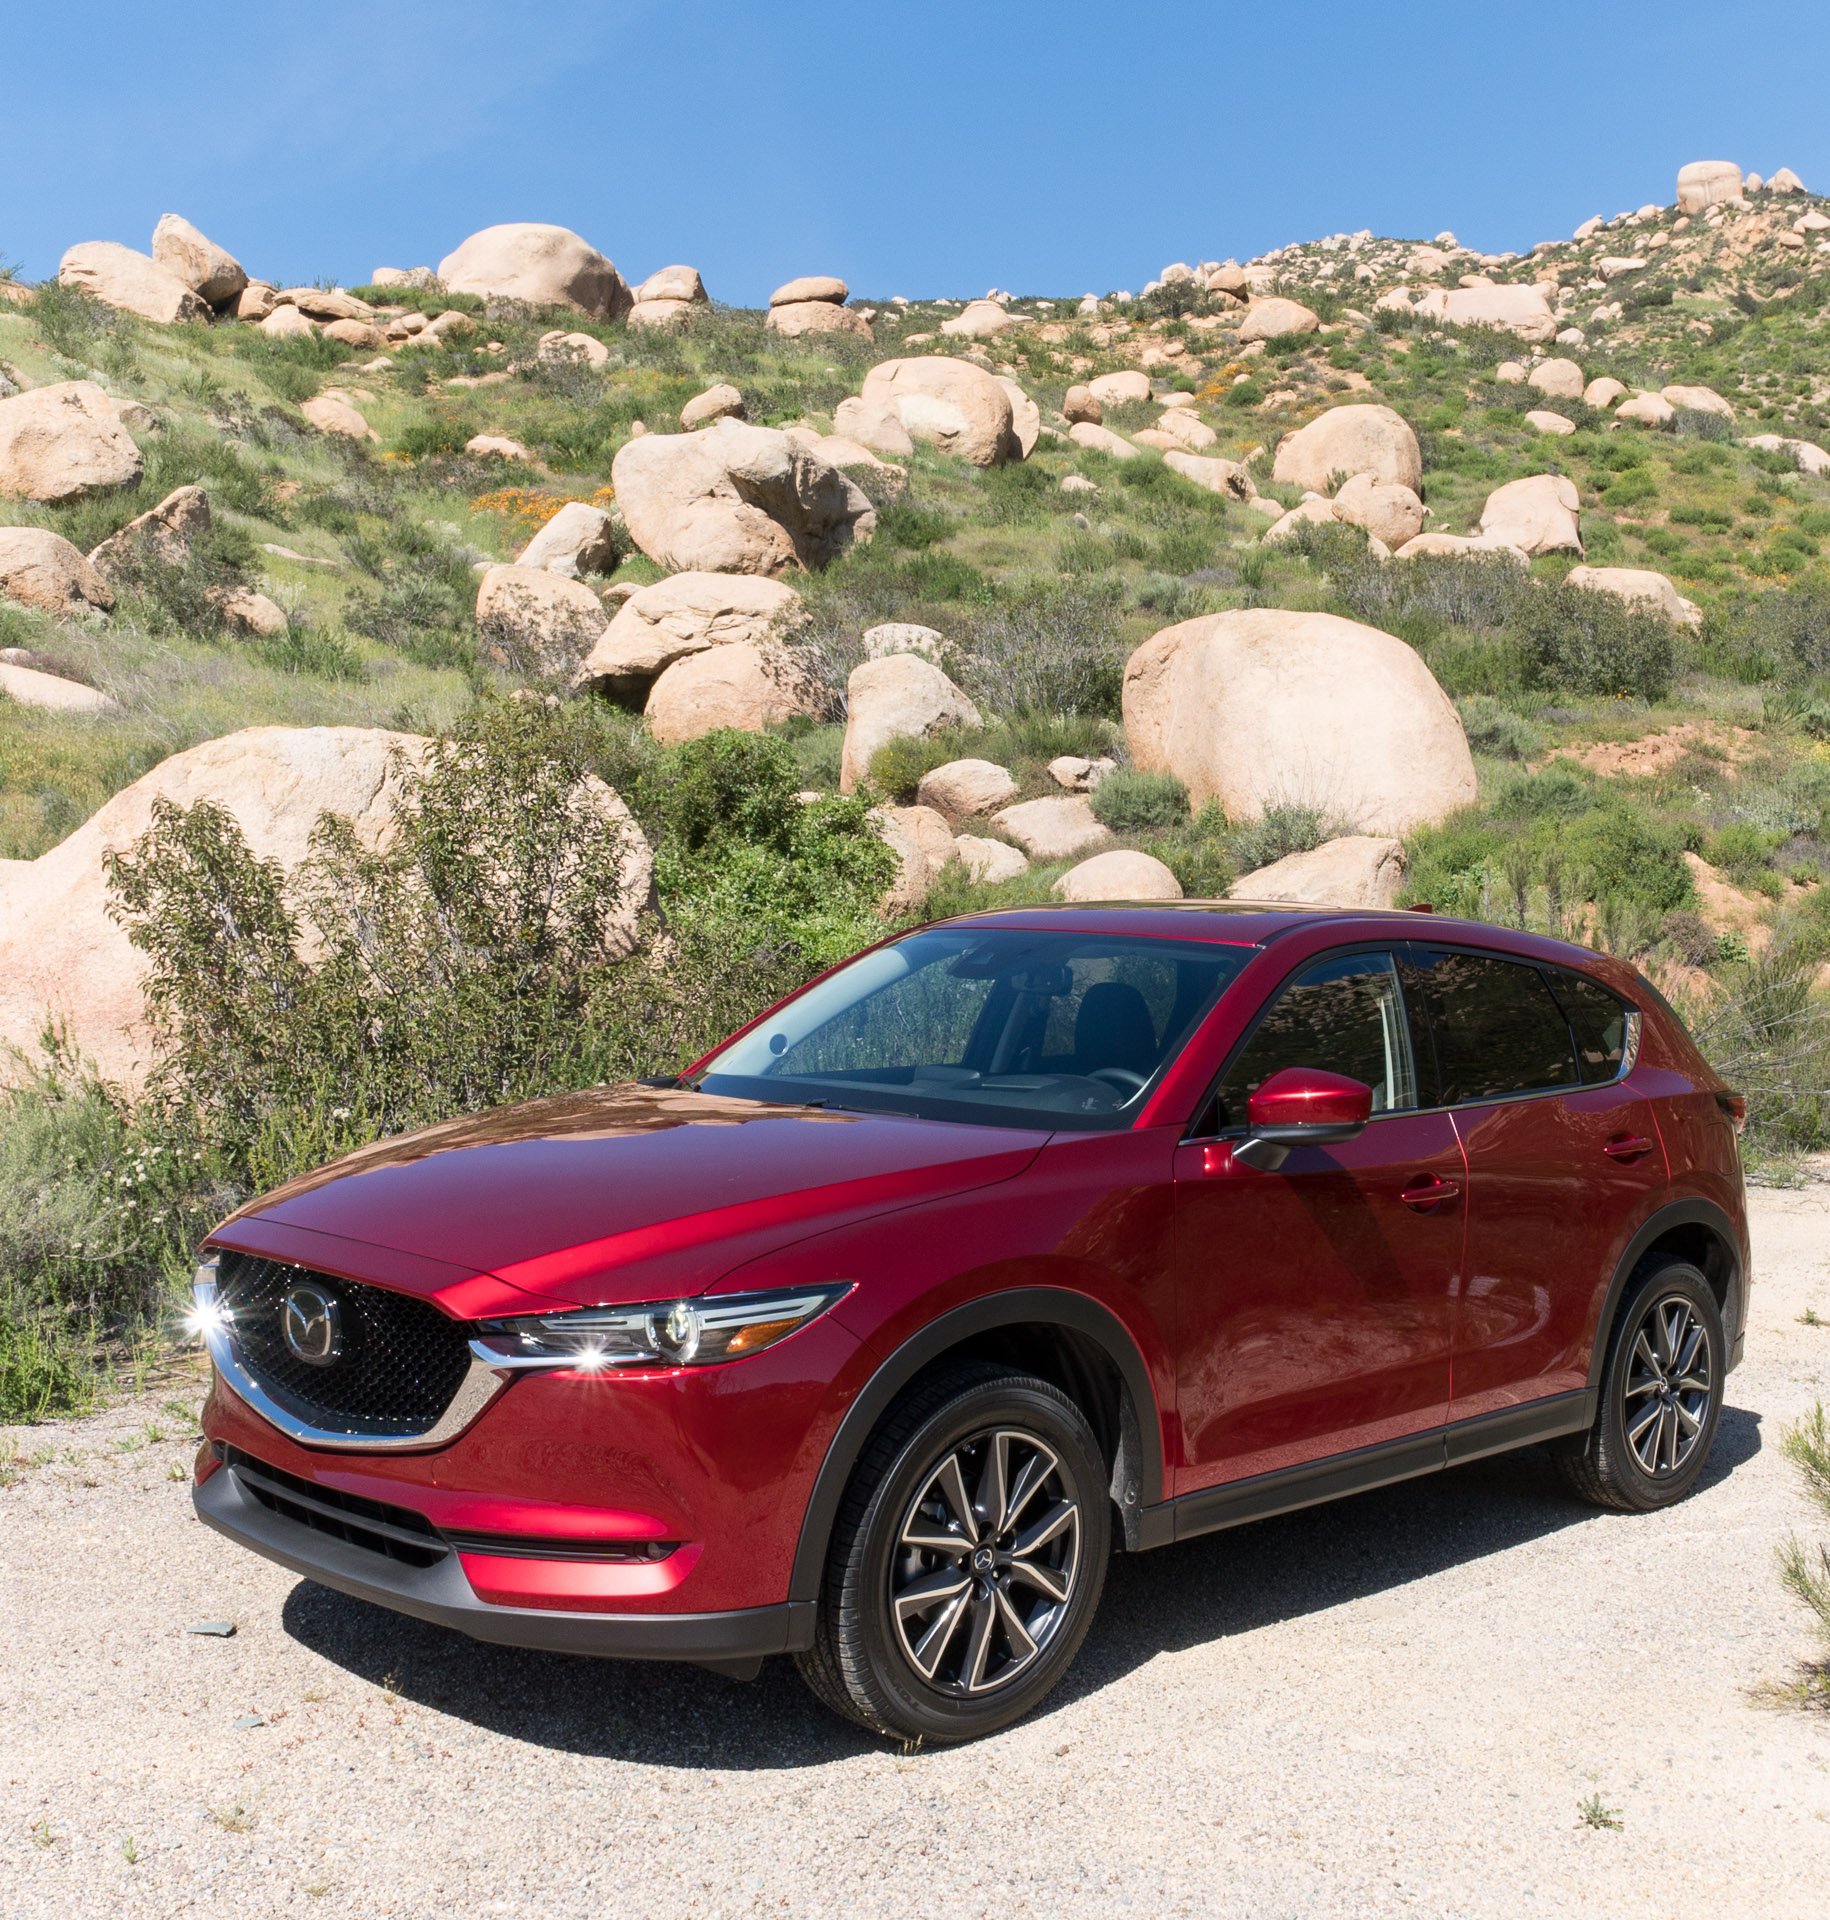 2017 Mazda CX-5 Grand Touring First Drive Review